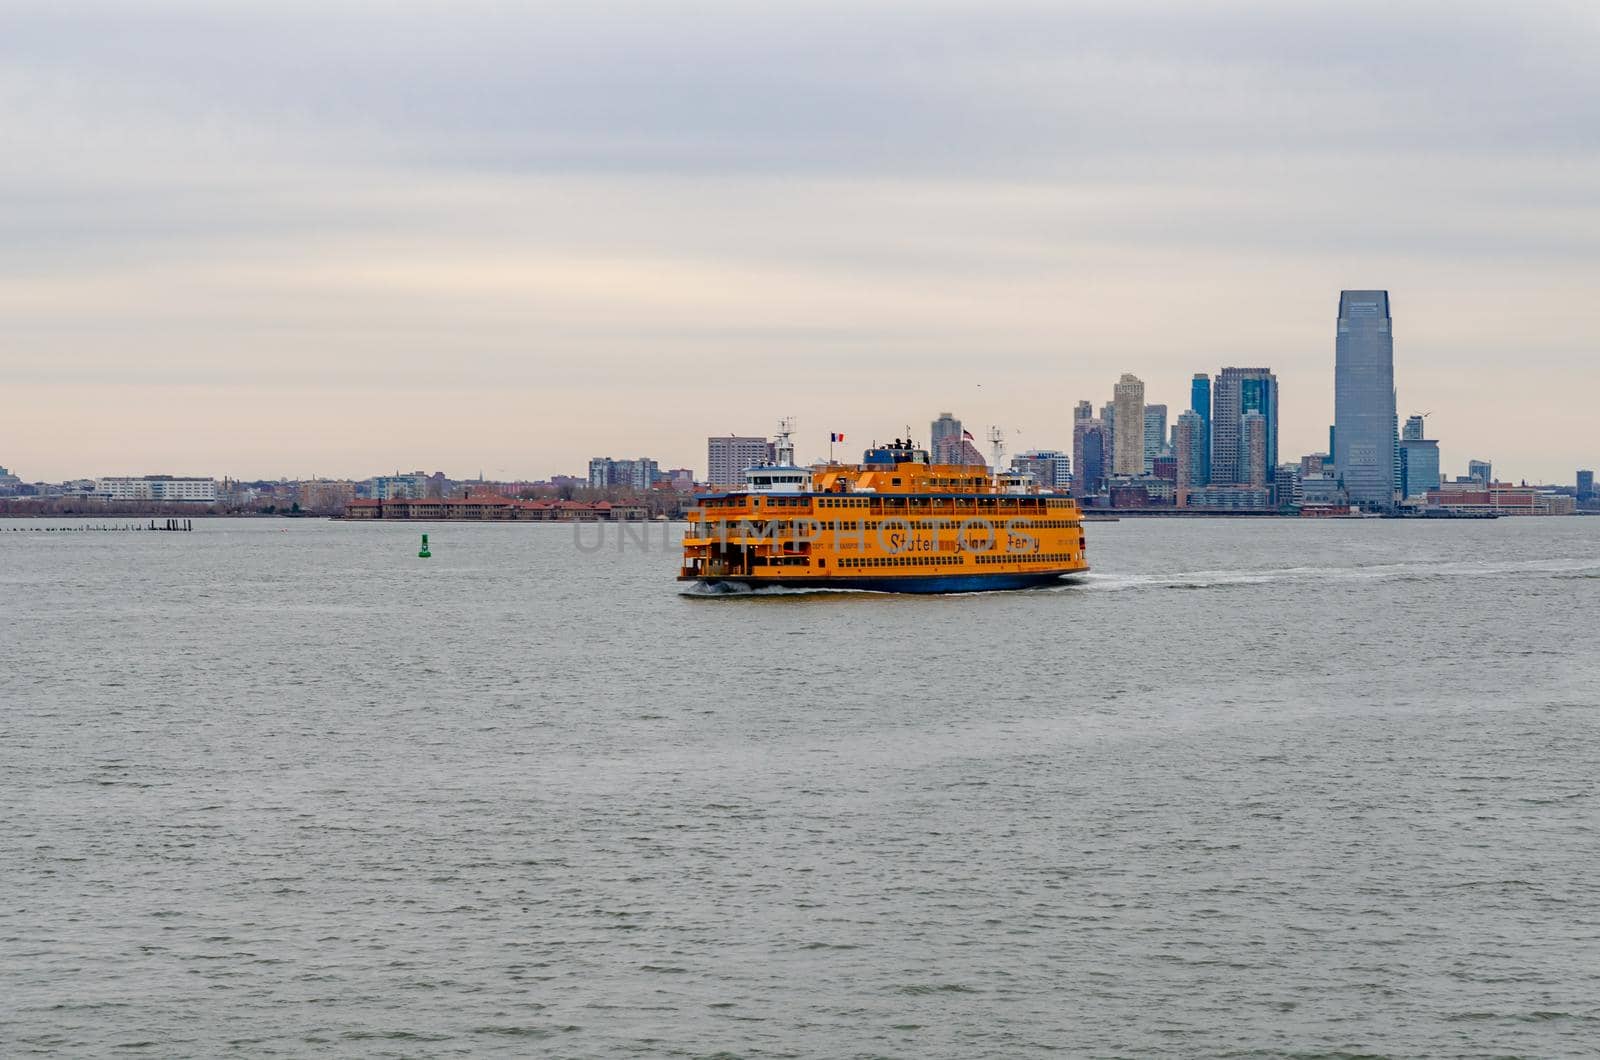 Yellow Staten Island Ferry on Hudson river passing by in front of Jersey City with office building skyscraper, New York, during winter evening with overcast, horizontal